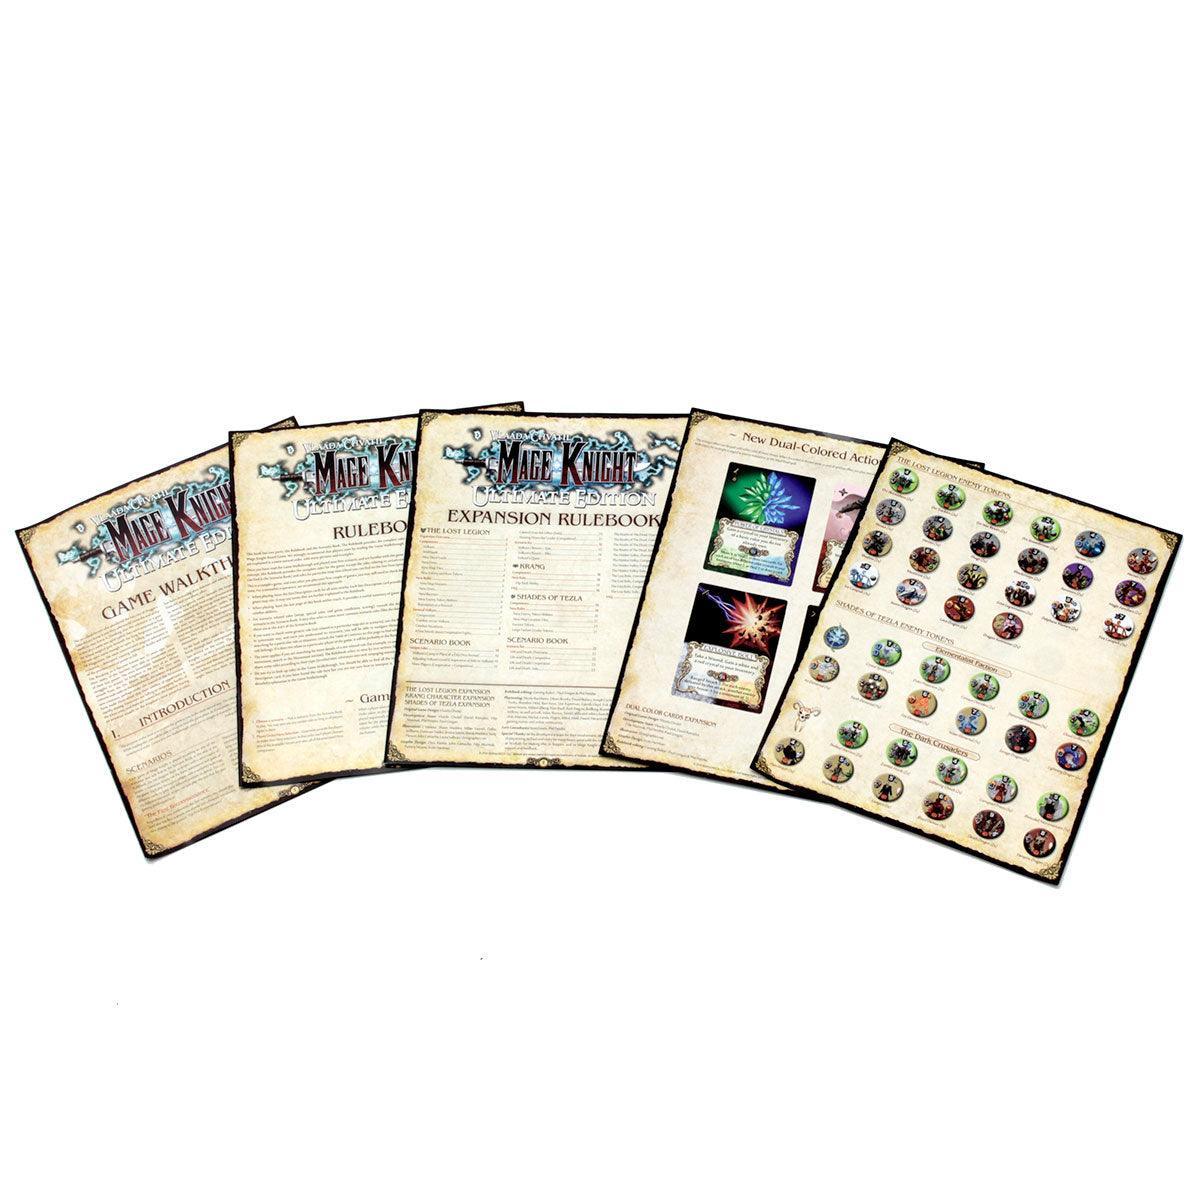 Mage Knight: Ultimate Edition - Gaming Library